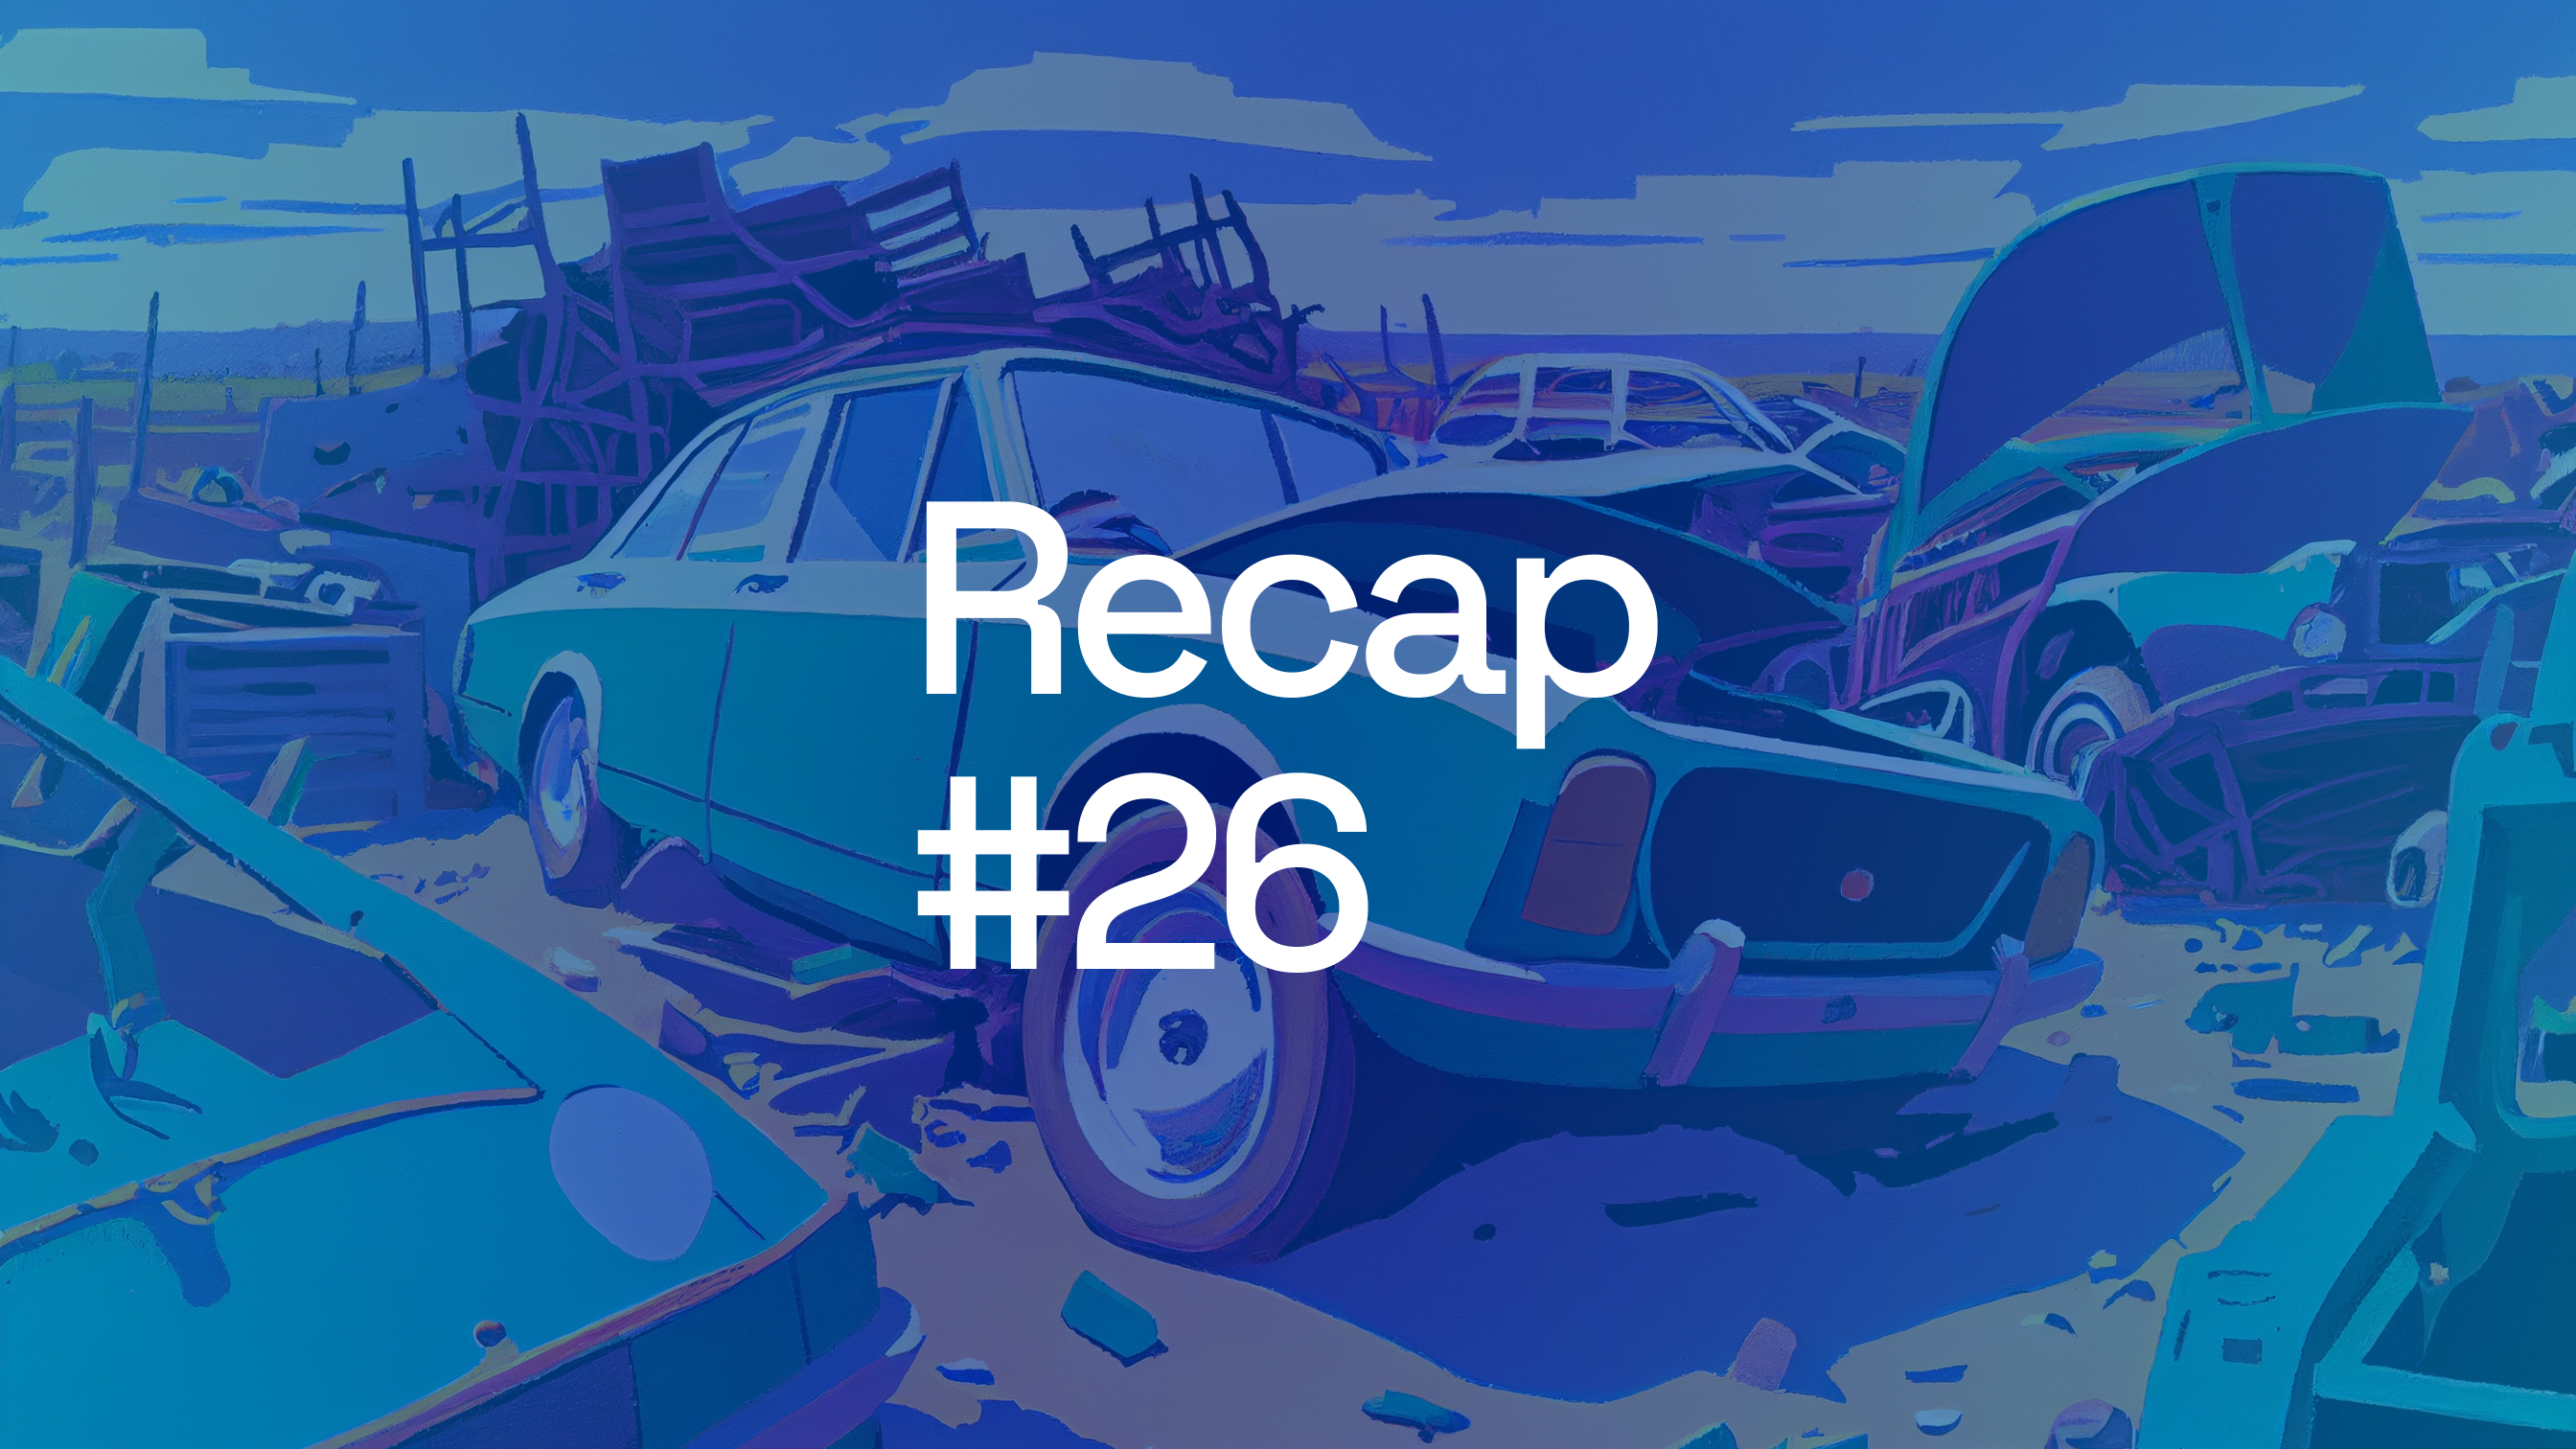 Recap #26 features Sea Limited, Copart, and David Barber’s legendary 1997 speech "Delivering Shareholder Value"